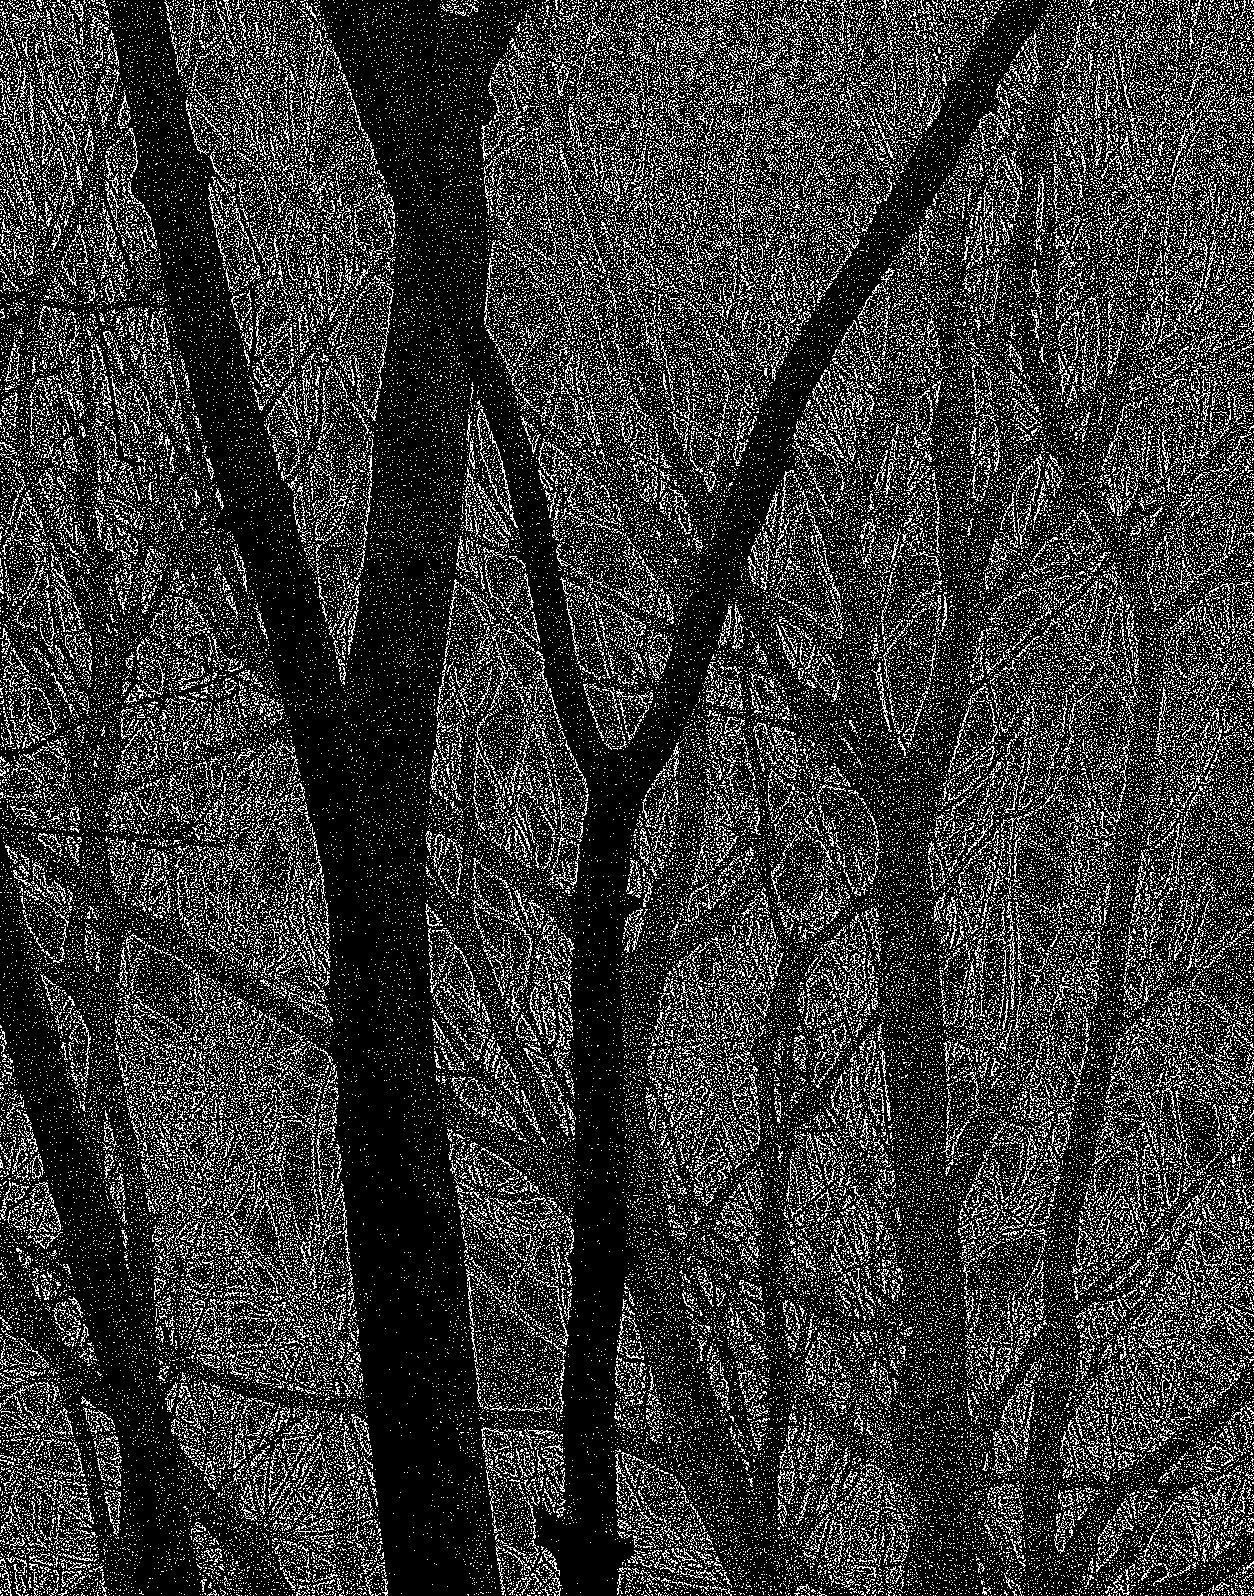 Geoff Dunlop Black and White Photograph - The Language of Trees 420 / b&w drawing, Photograph, Archival Ink Jet